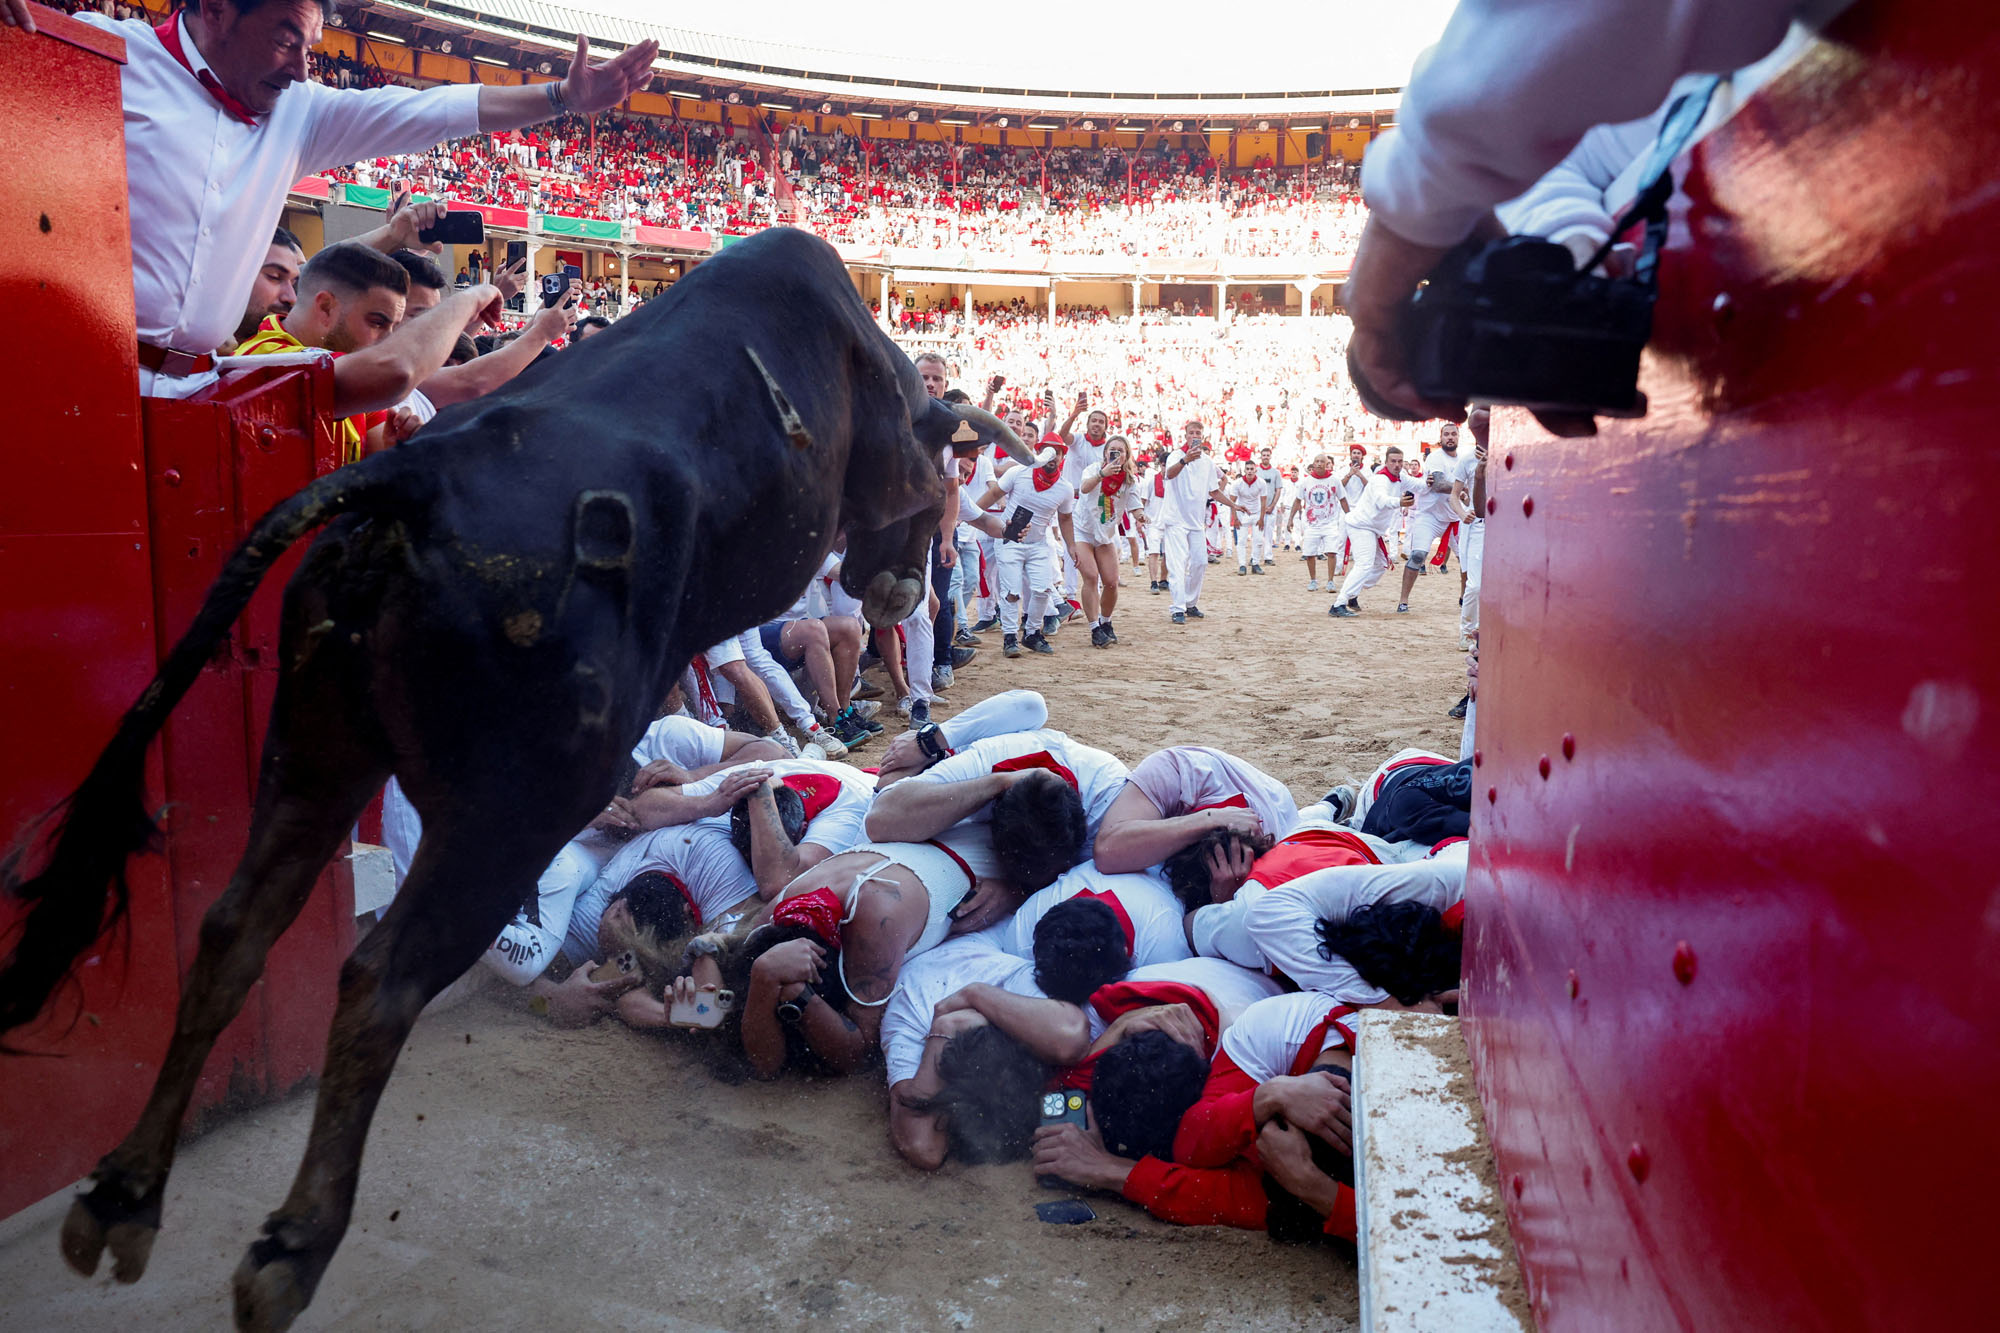 Revelers brace themselves as a steer jumps over them at the San Fermin festival in Pamplona, Spain